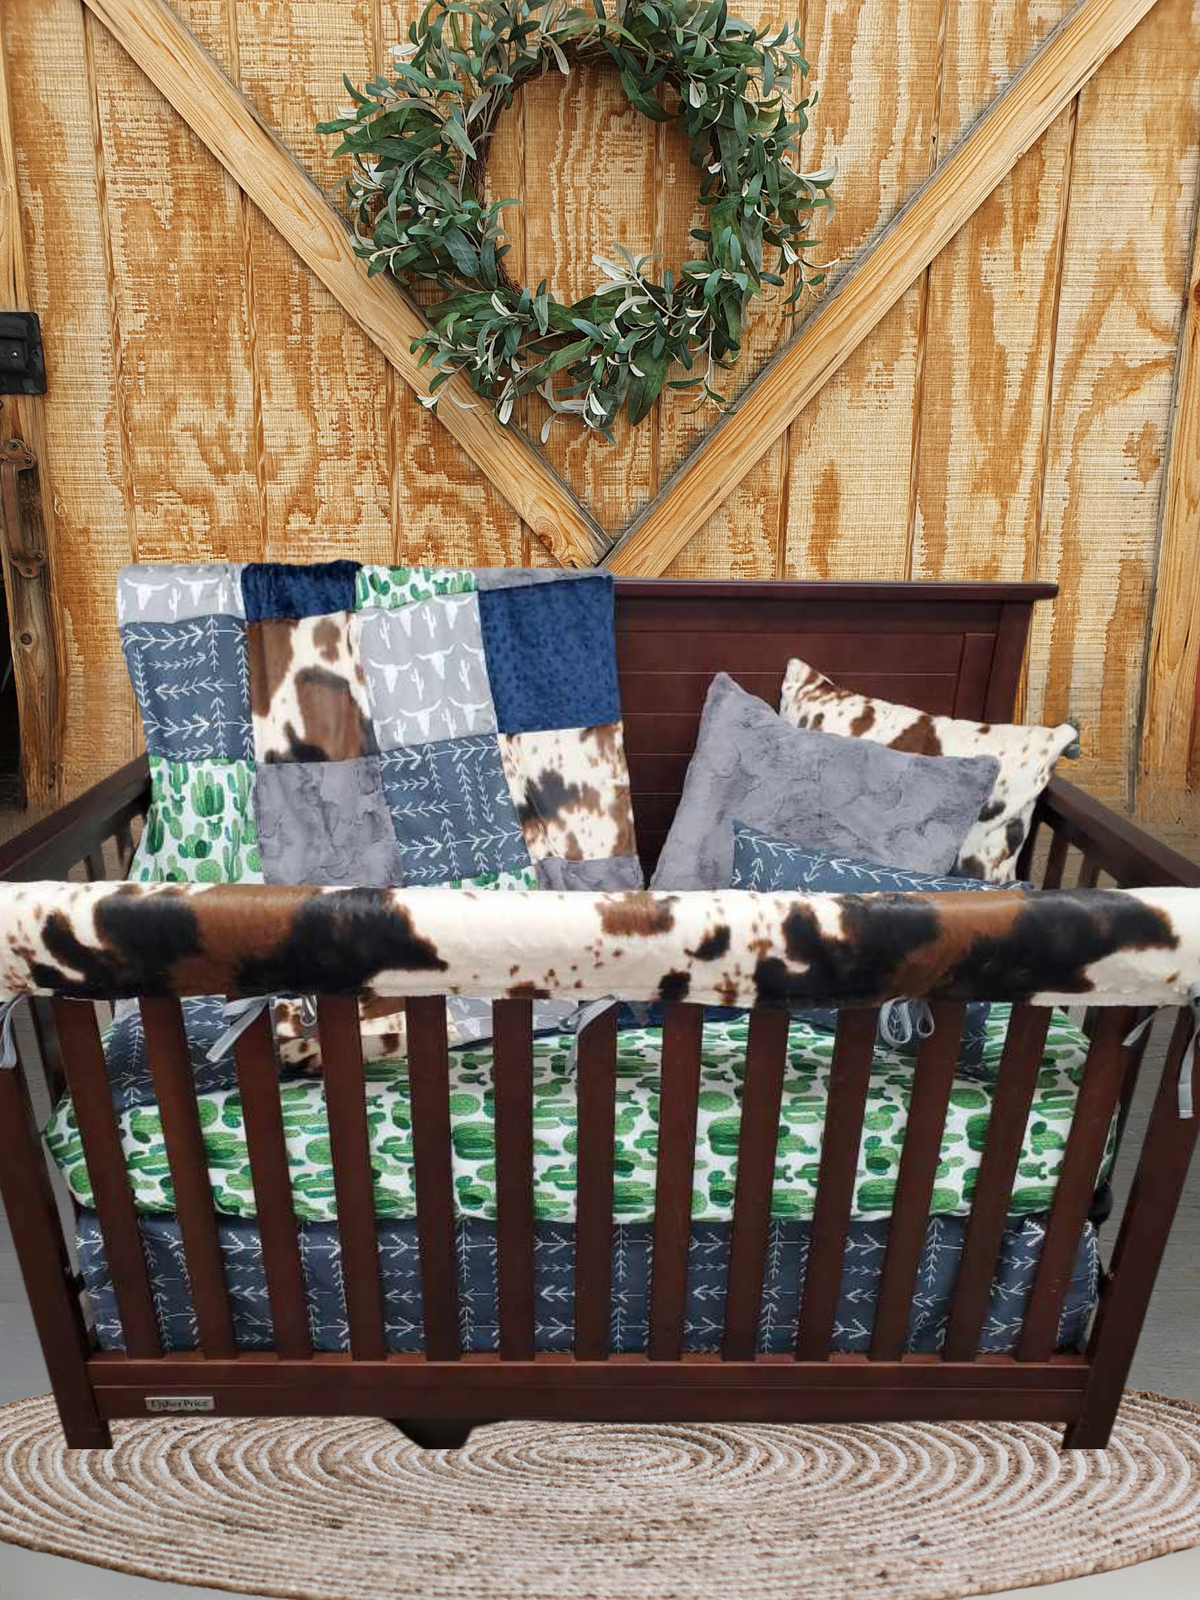 New Release Boy Crib Bedding- Steer, Cactus, and Cow Minky Western Ranch Baby Bedding &amp; Nursery Collection - DBC Baby Bedding Co 